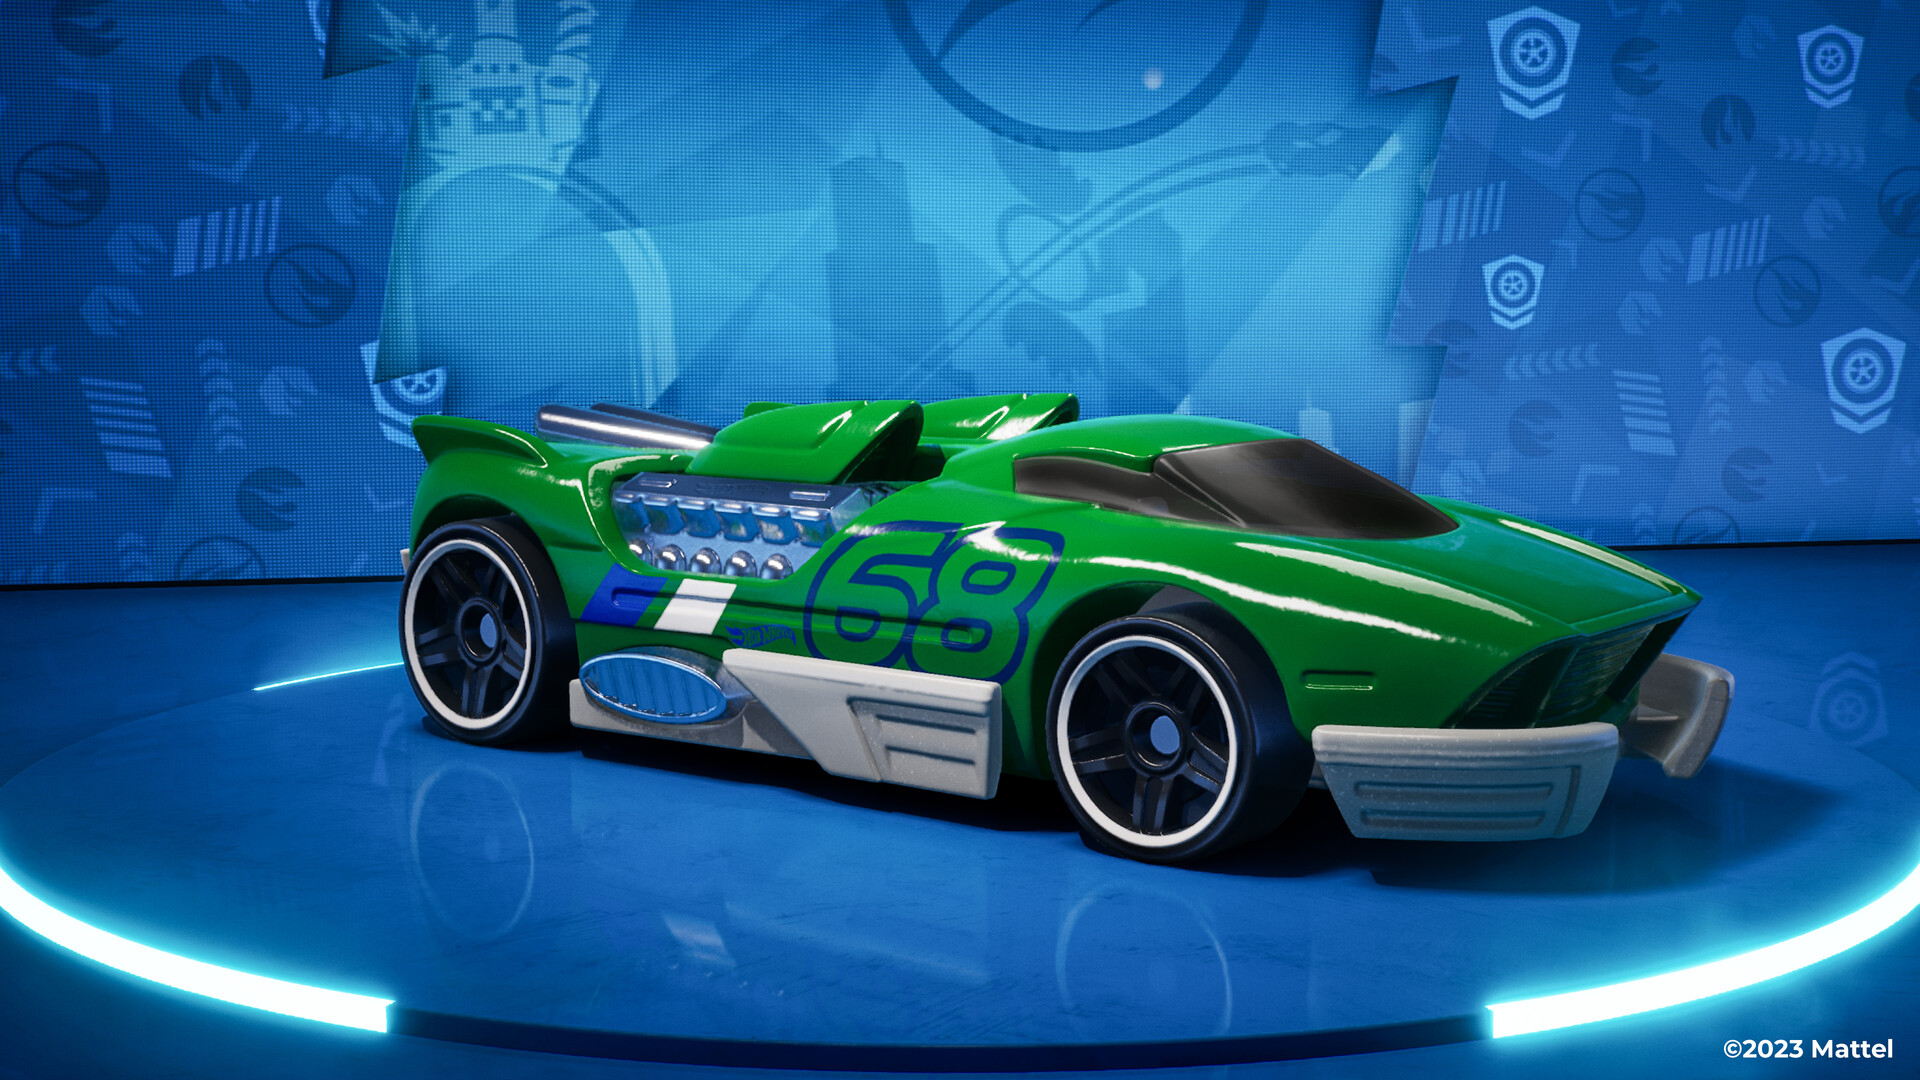 Hot Wheels Unleashed 2 Turbocharged PlayStation 4 Account Pixelpuffin.net Activation Link